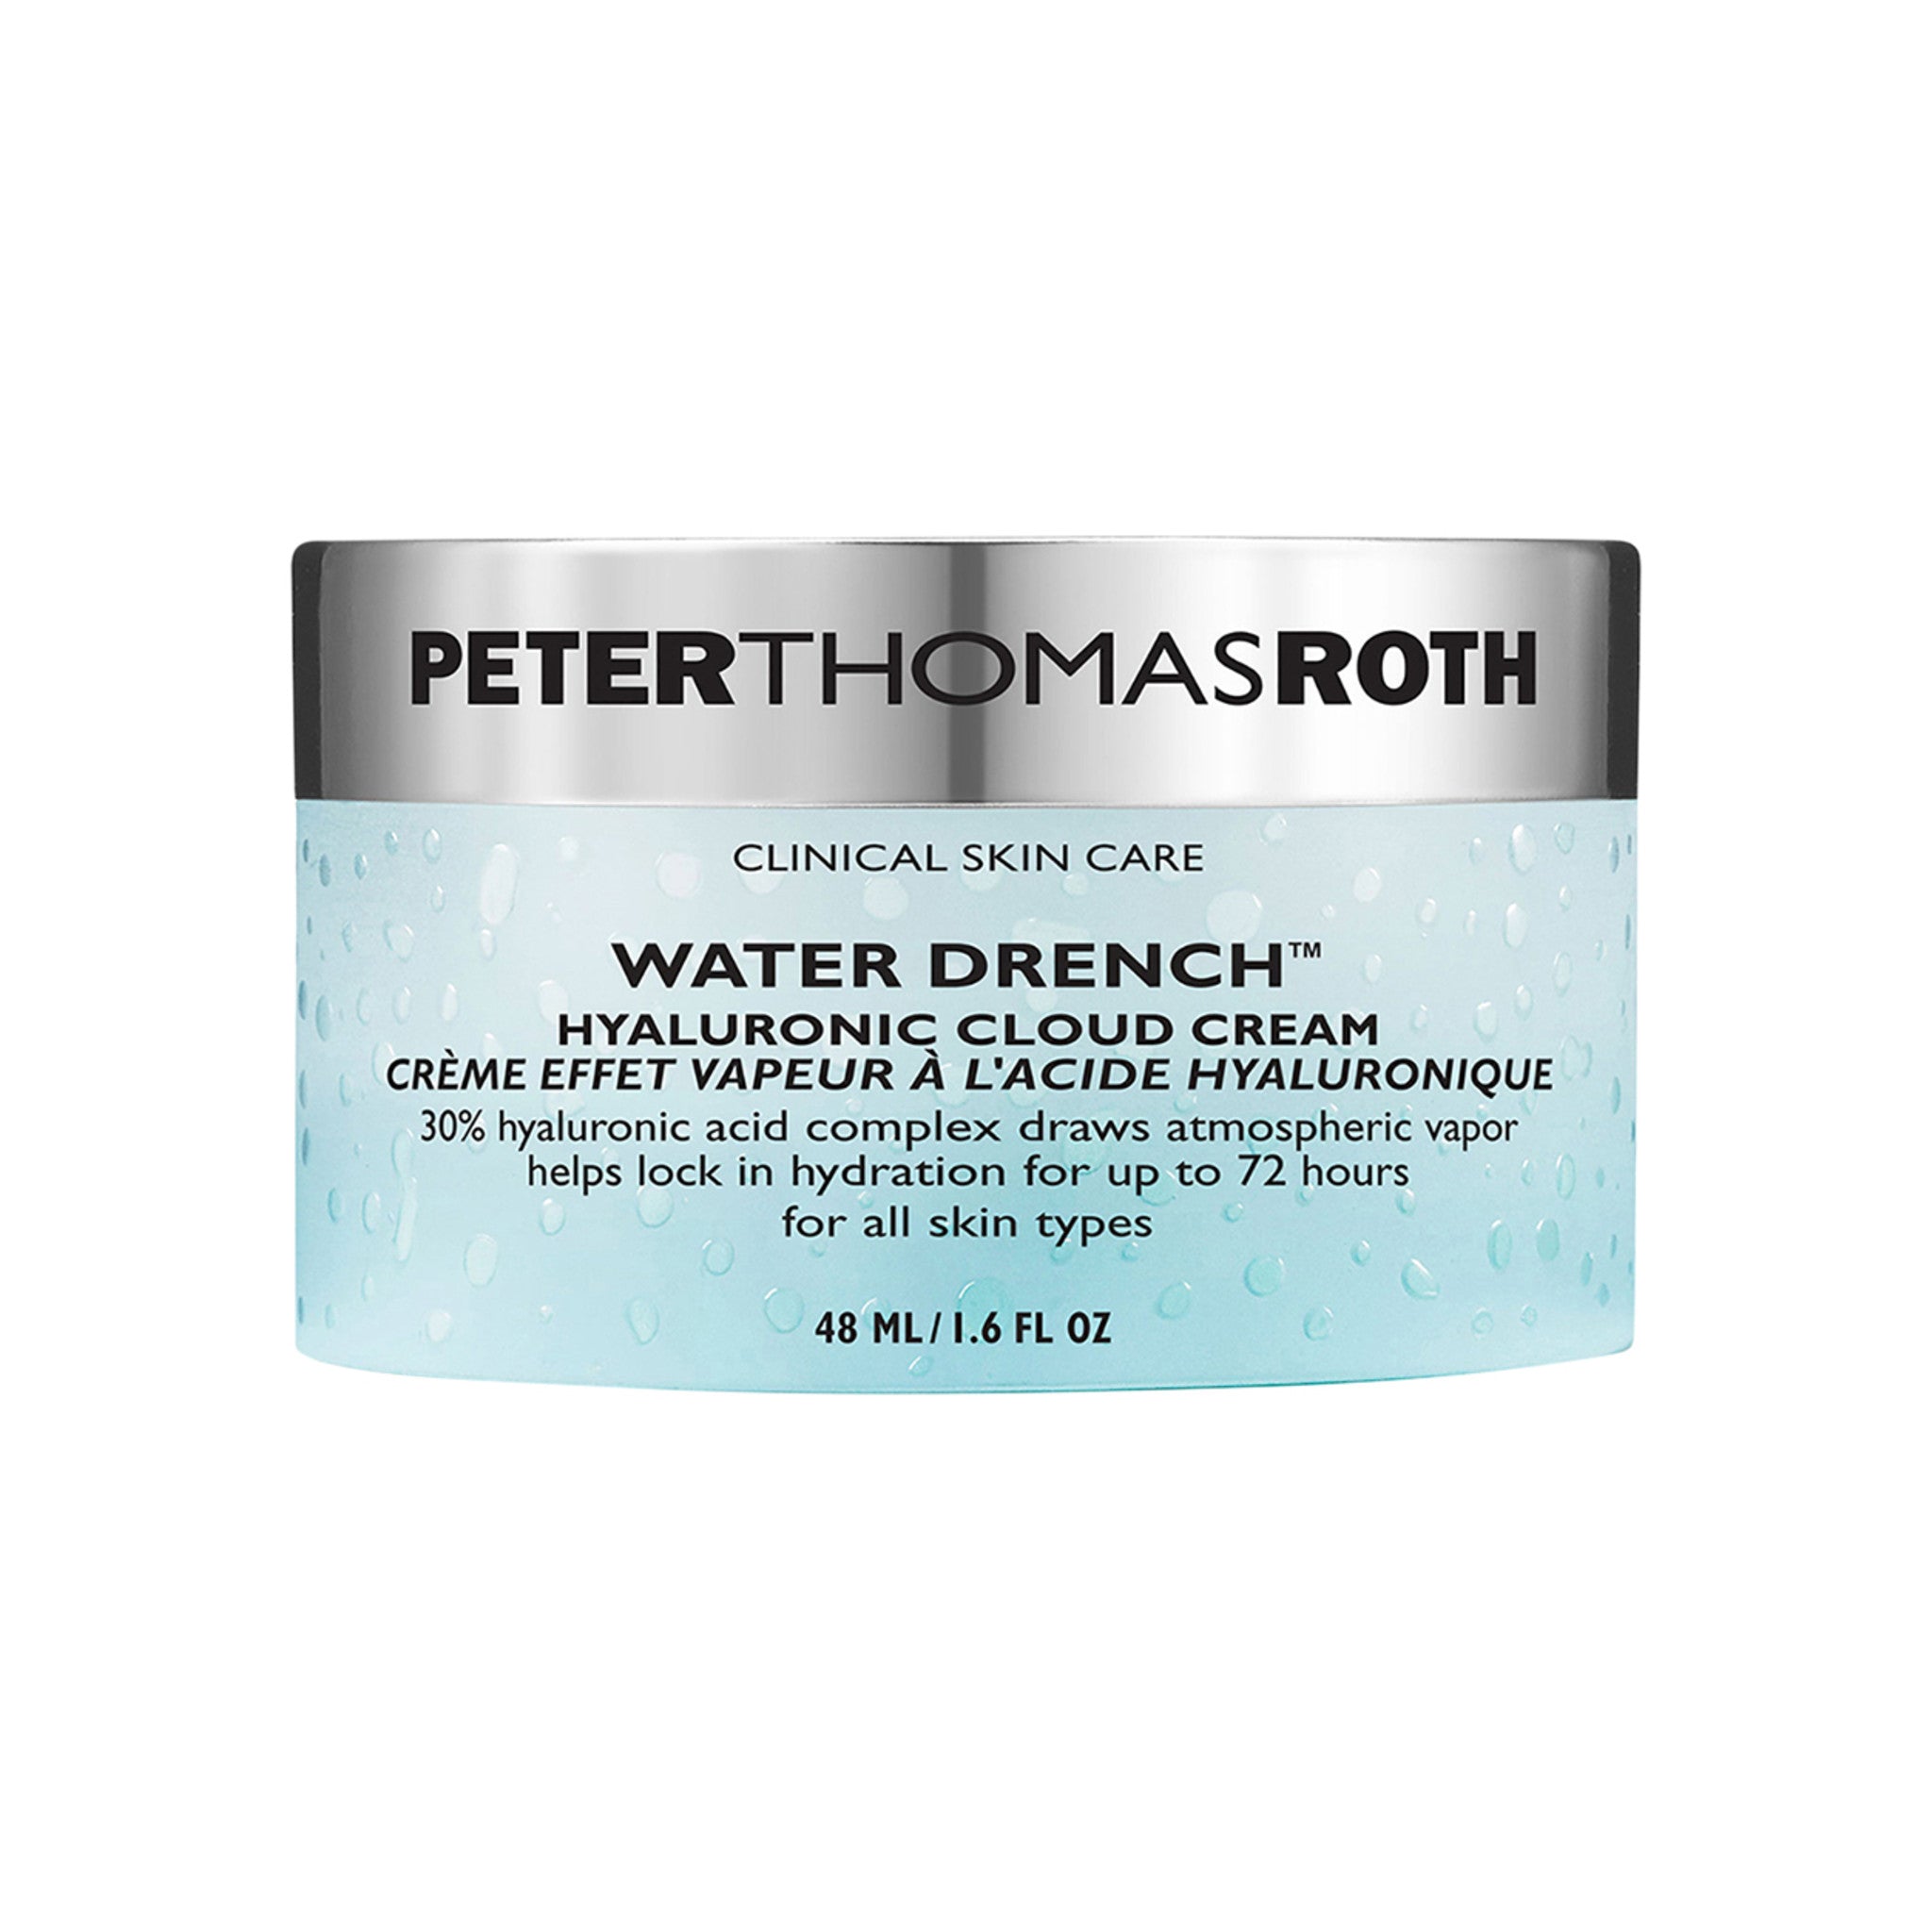 Peter Thomas Roth WATER DRENCH Hyaluronic Cloud Cream main image. This product is for deep complexions